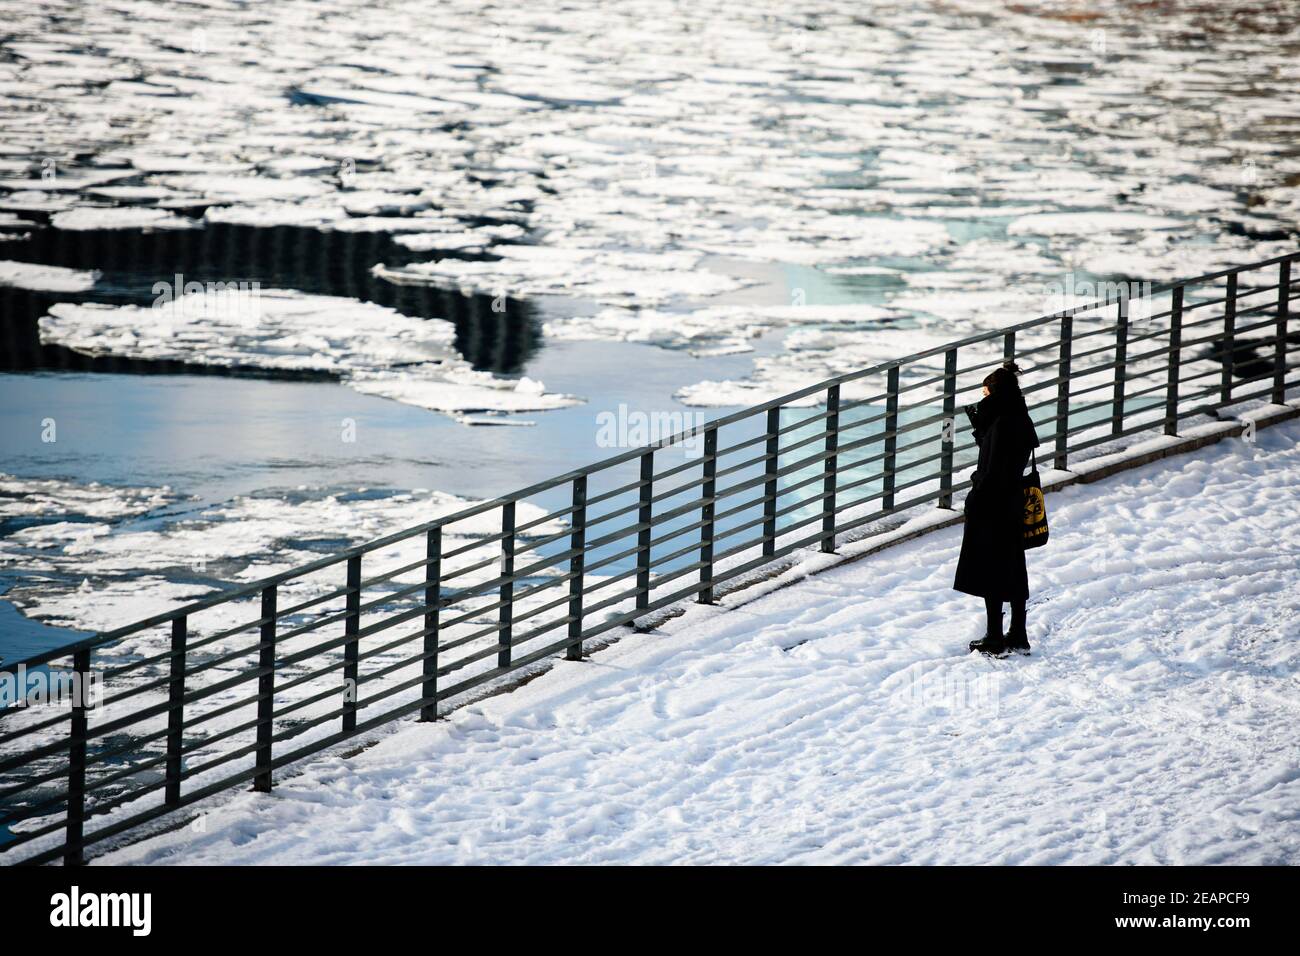 Berlin, Germany. 10th Feb, 2021. Germany, Berlin, February 10, 2021: A woman looks at floating ice sheets next to the Spree River. A weather phenomenon called the polar vortex split brought snow and icy winds to Berlin and Brandenburg with temperatures well below freezing. (Photo by Jan Scheunert/Sipa USA) Credit: Sipa USA/Alamy Live News Stock Photo